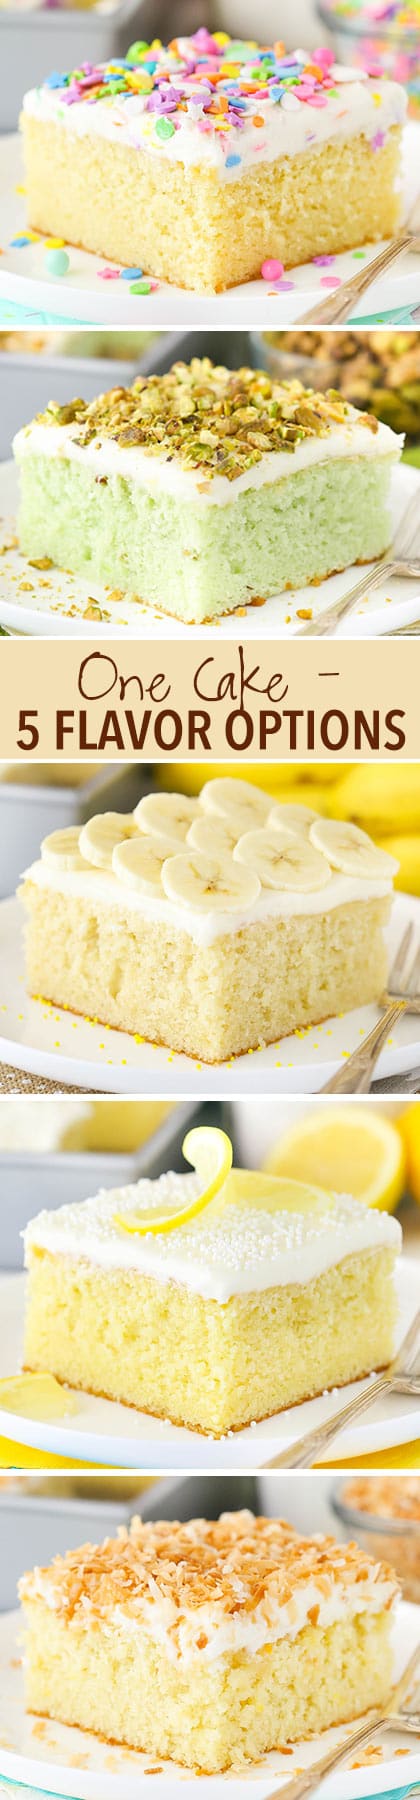 One Homemade Cake Mix - 5 different flavors! Easy to make and switch up!